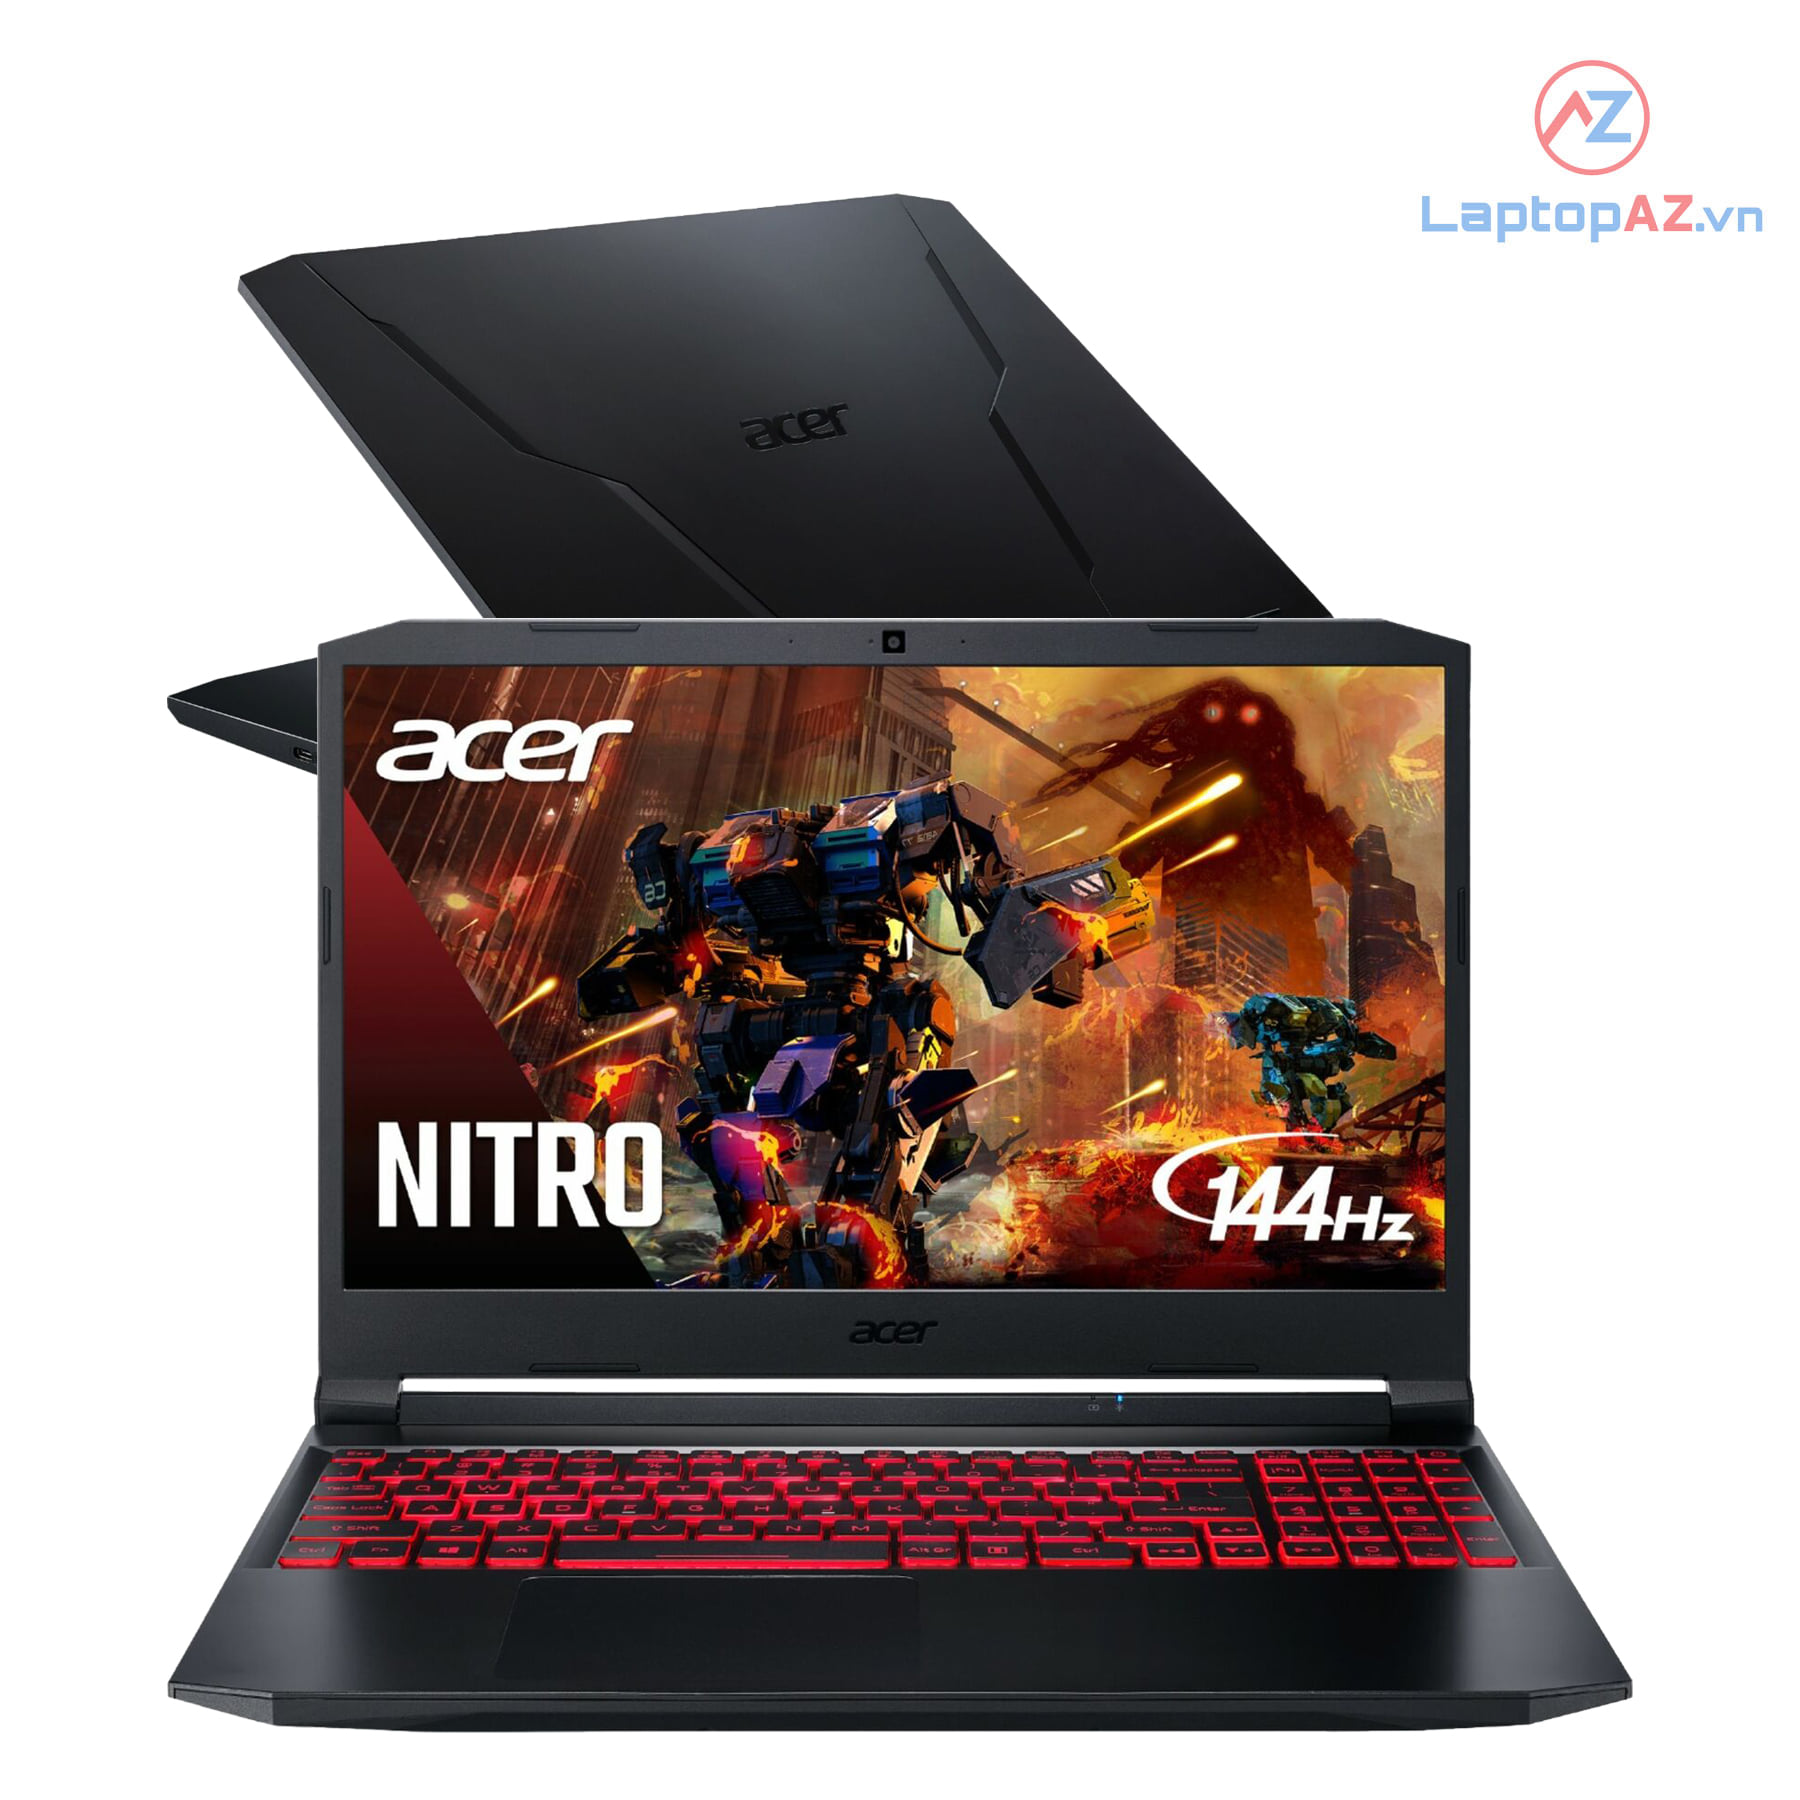 [New Outlet] Laptop Gaming Acer Nitro 5 2021 AN515-57-5700 (Core i5 - 11400H, 8GB, 512GB, RTX3050Ti, 15.6'' FHD IPS 144Hz)